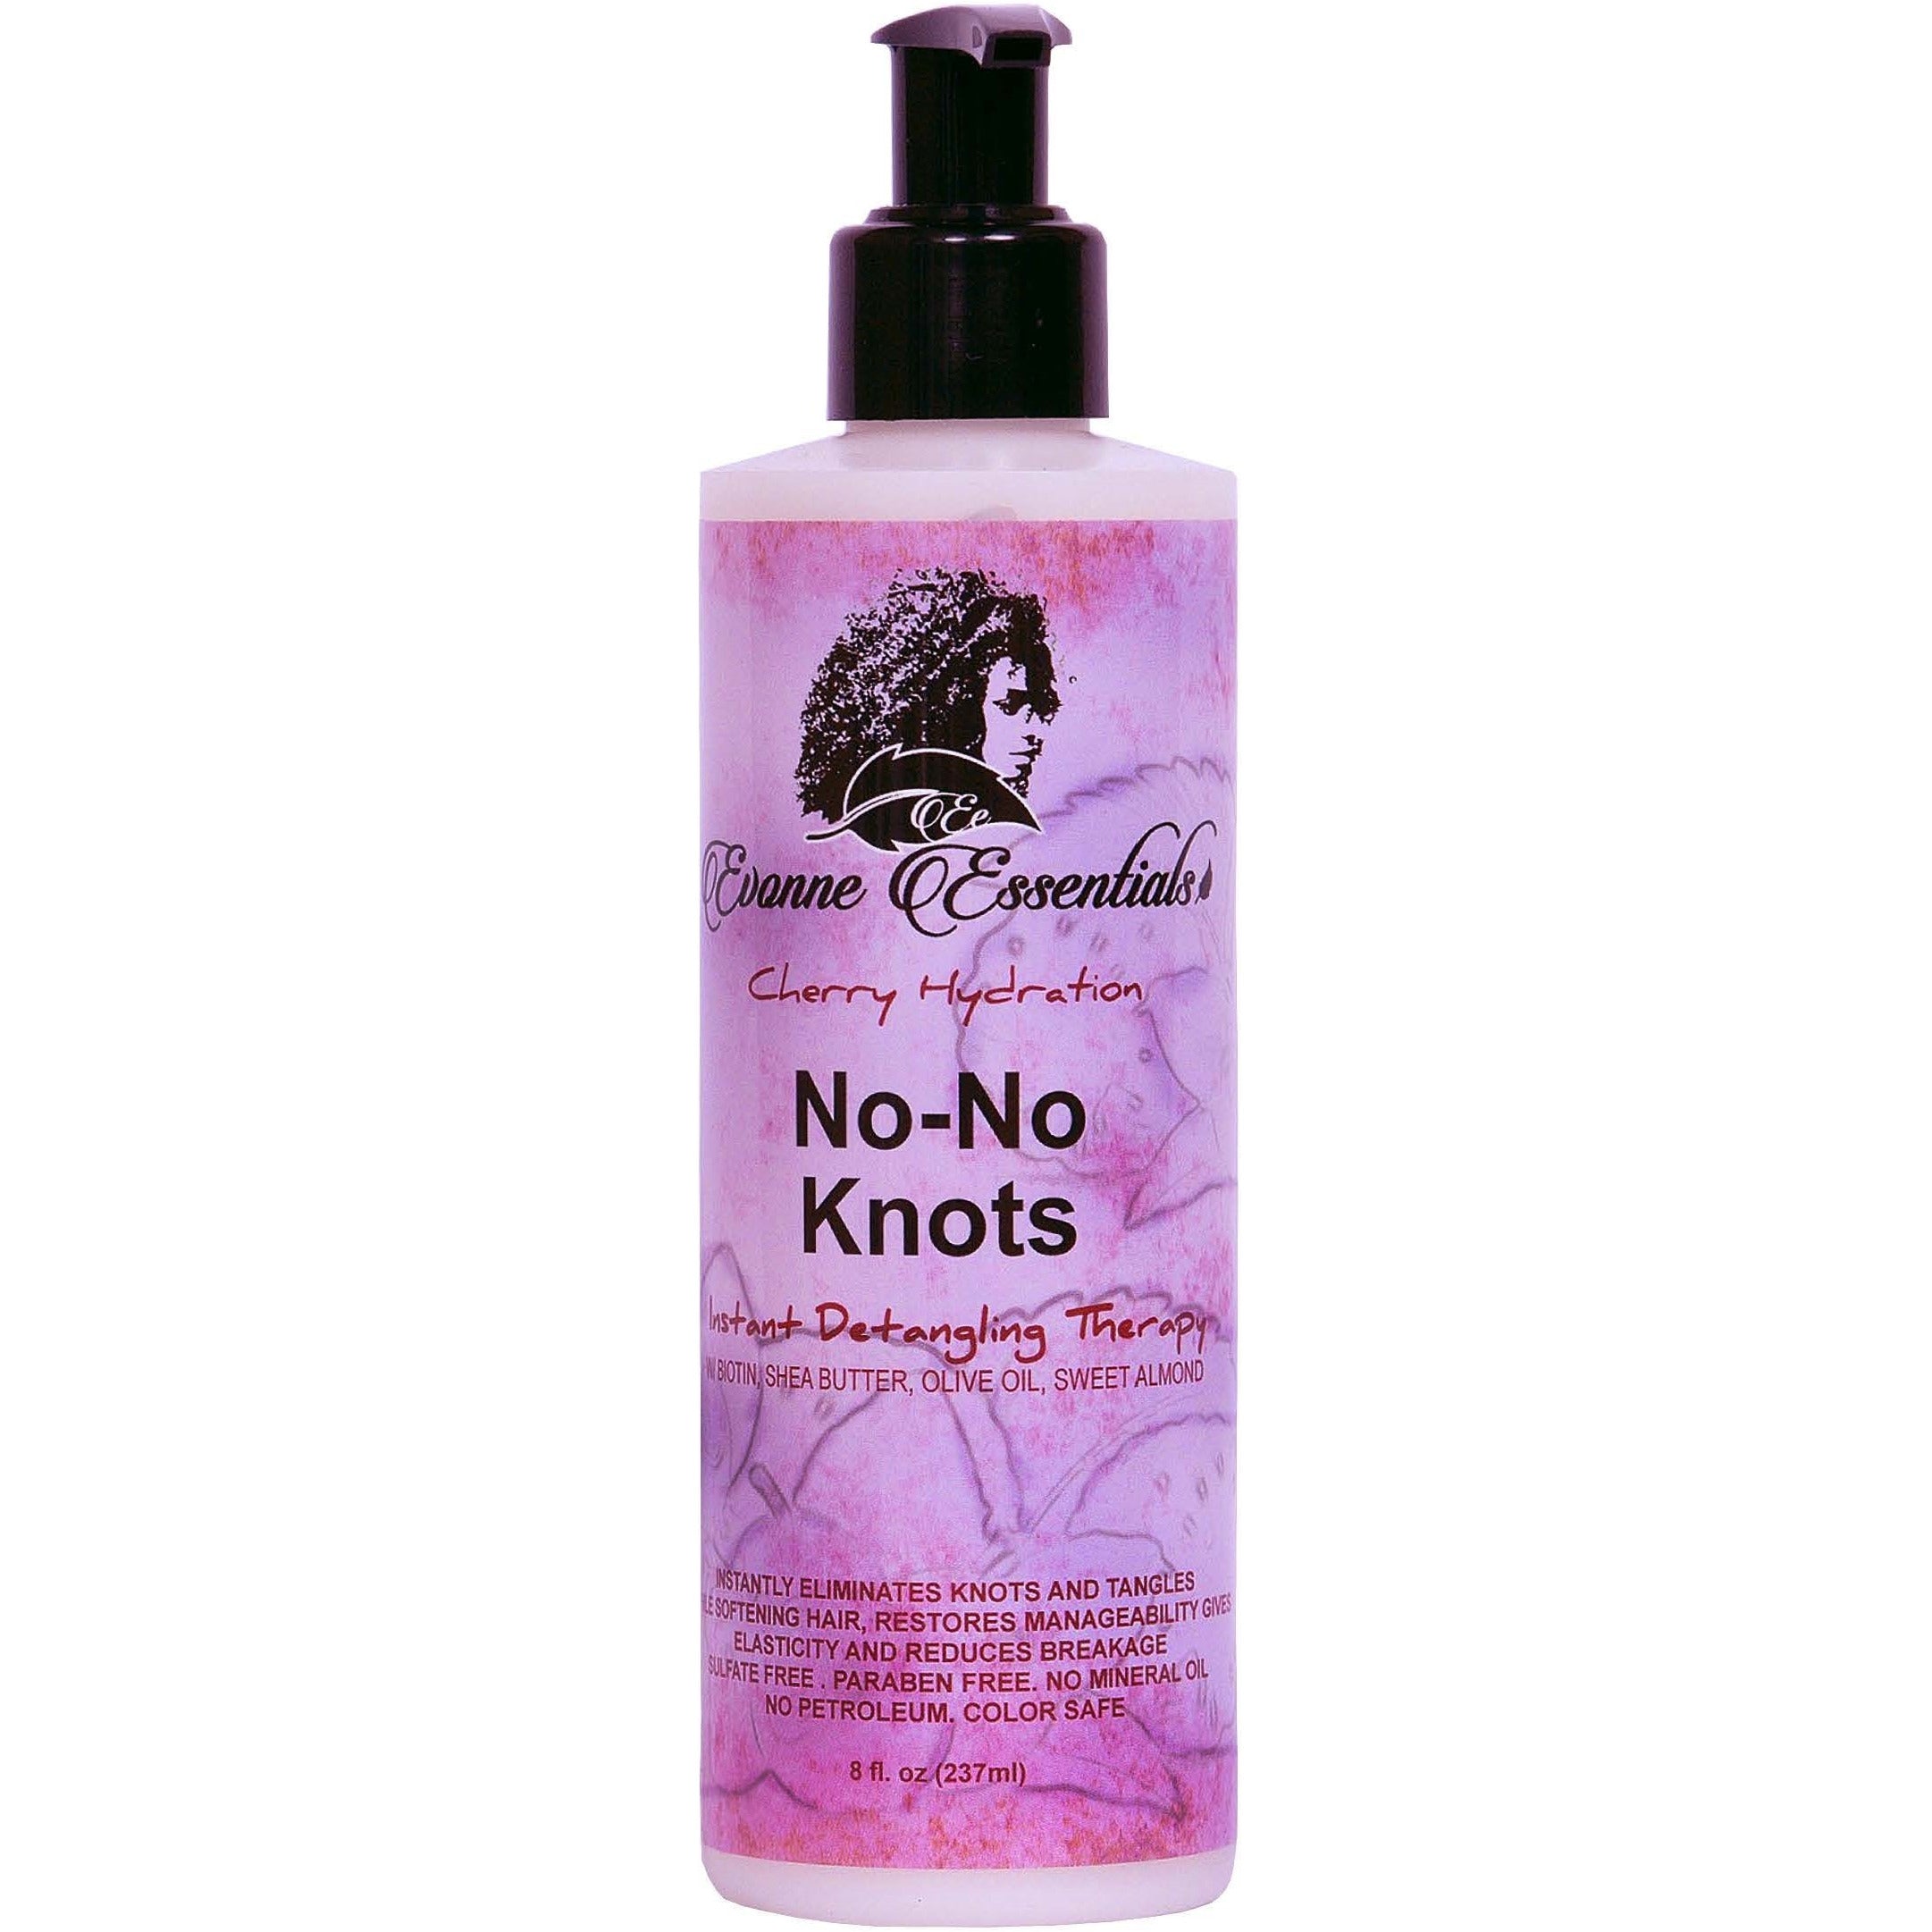 4th Ave Market: Cherry Hydration No-No Knots Instant Detangling Therapy